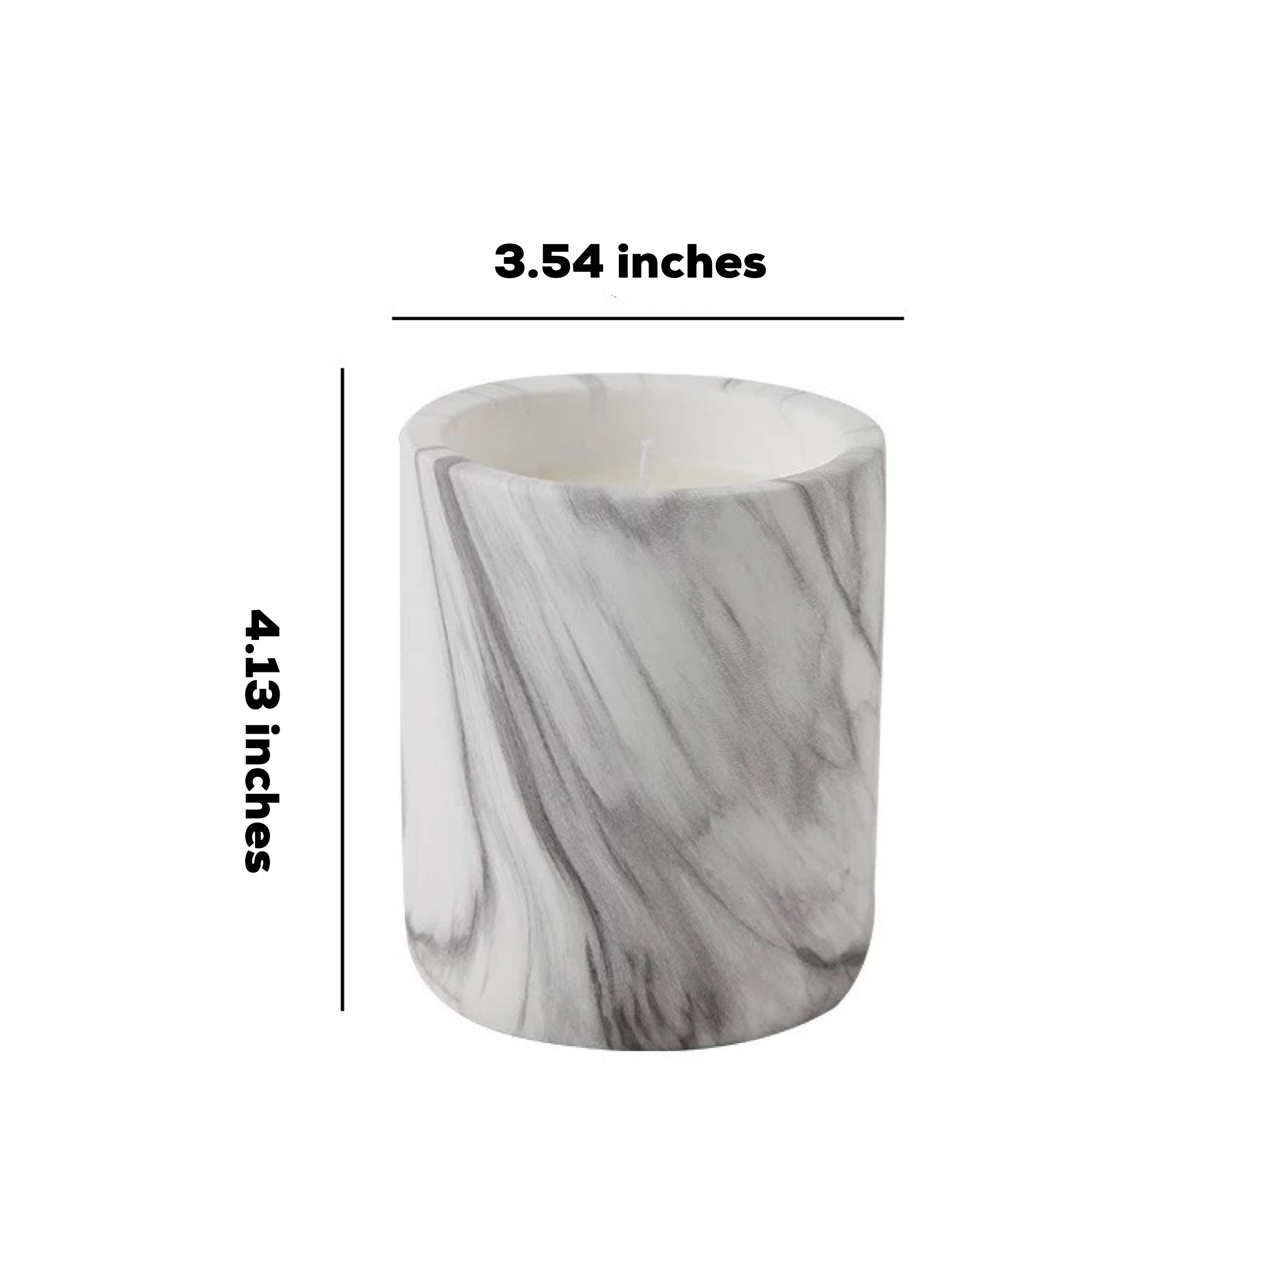 Wood Grain Ceramic Candle Vessel Wholesale – candlevesselsupply